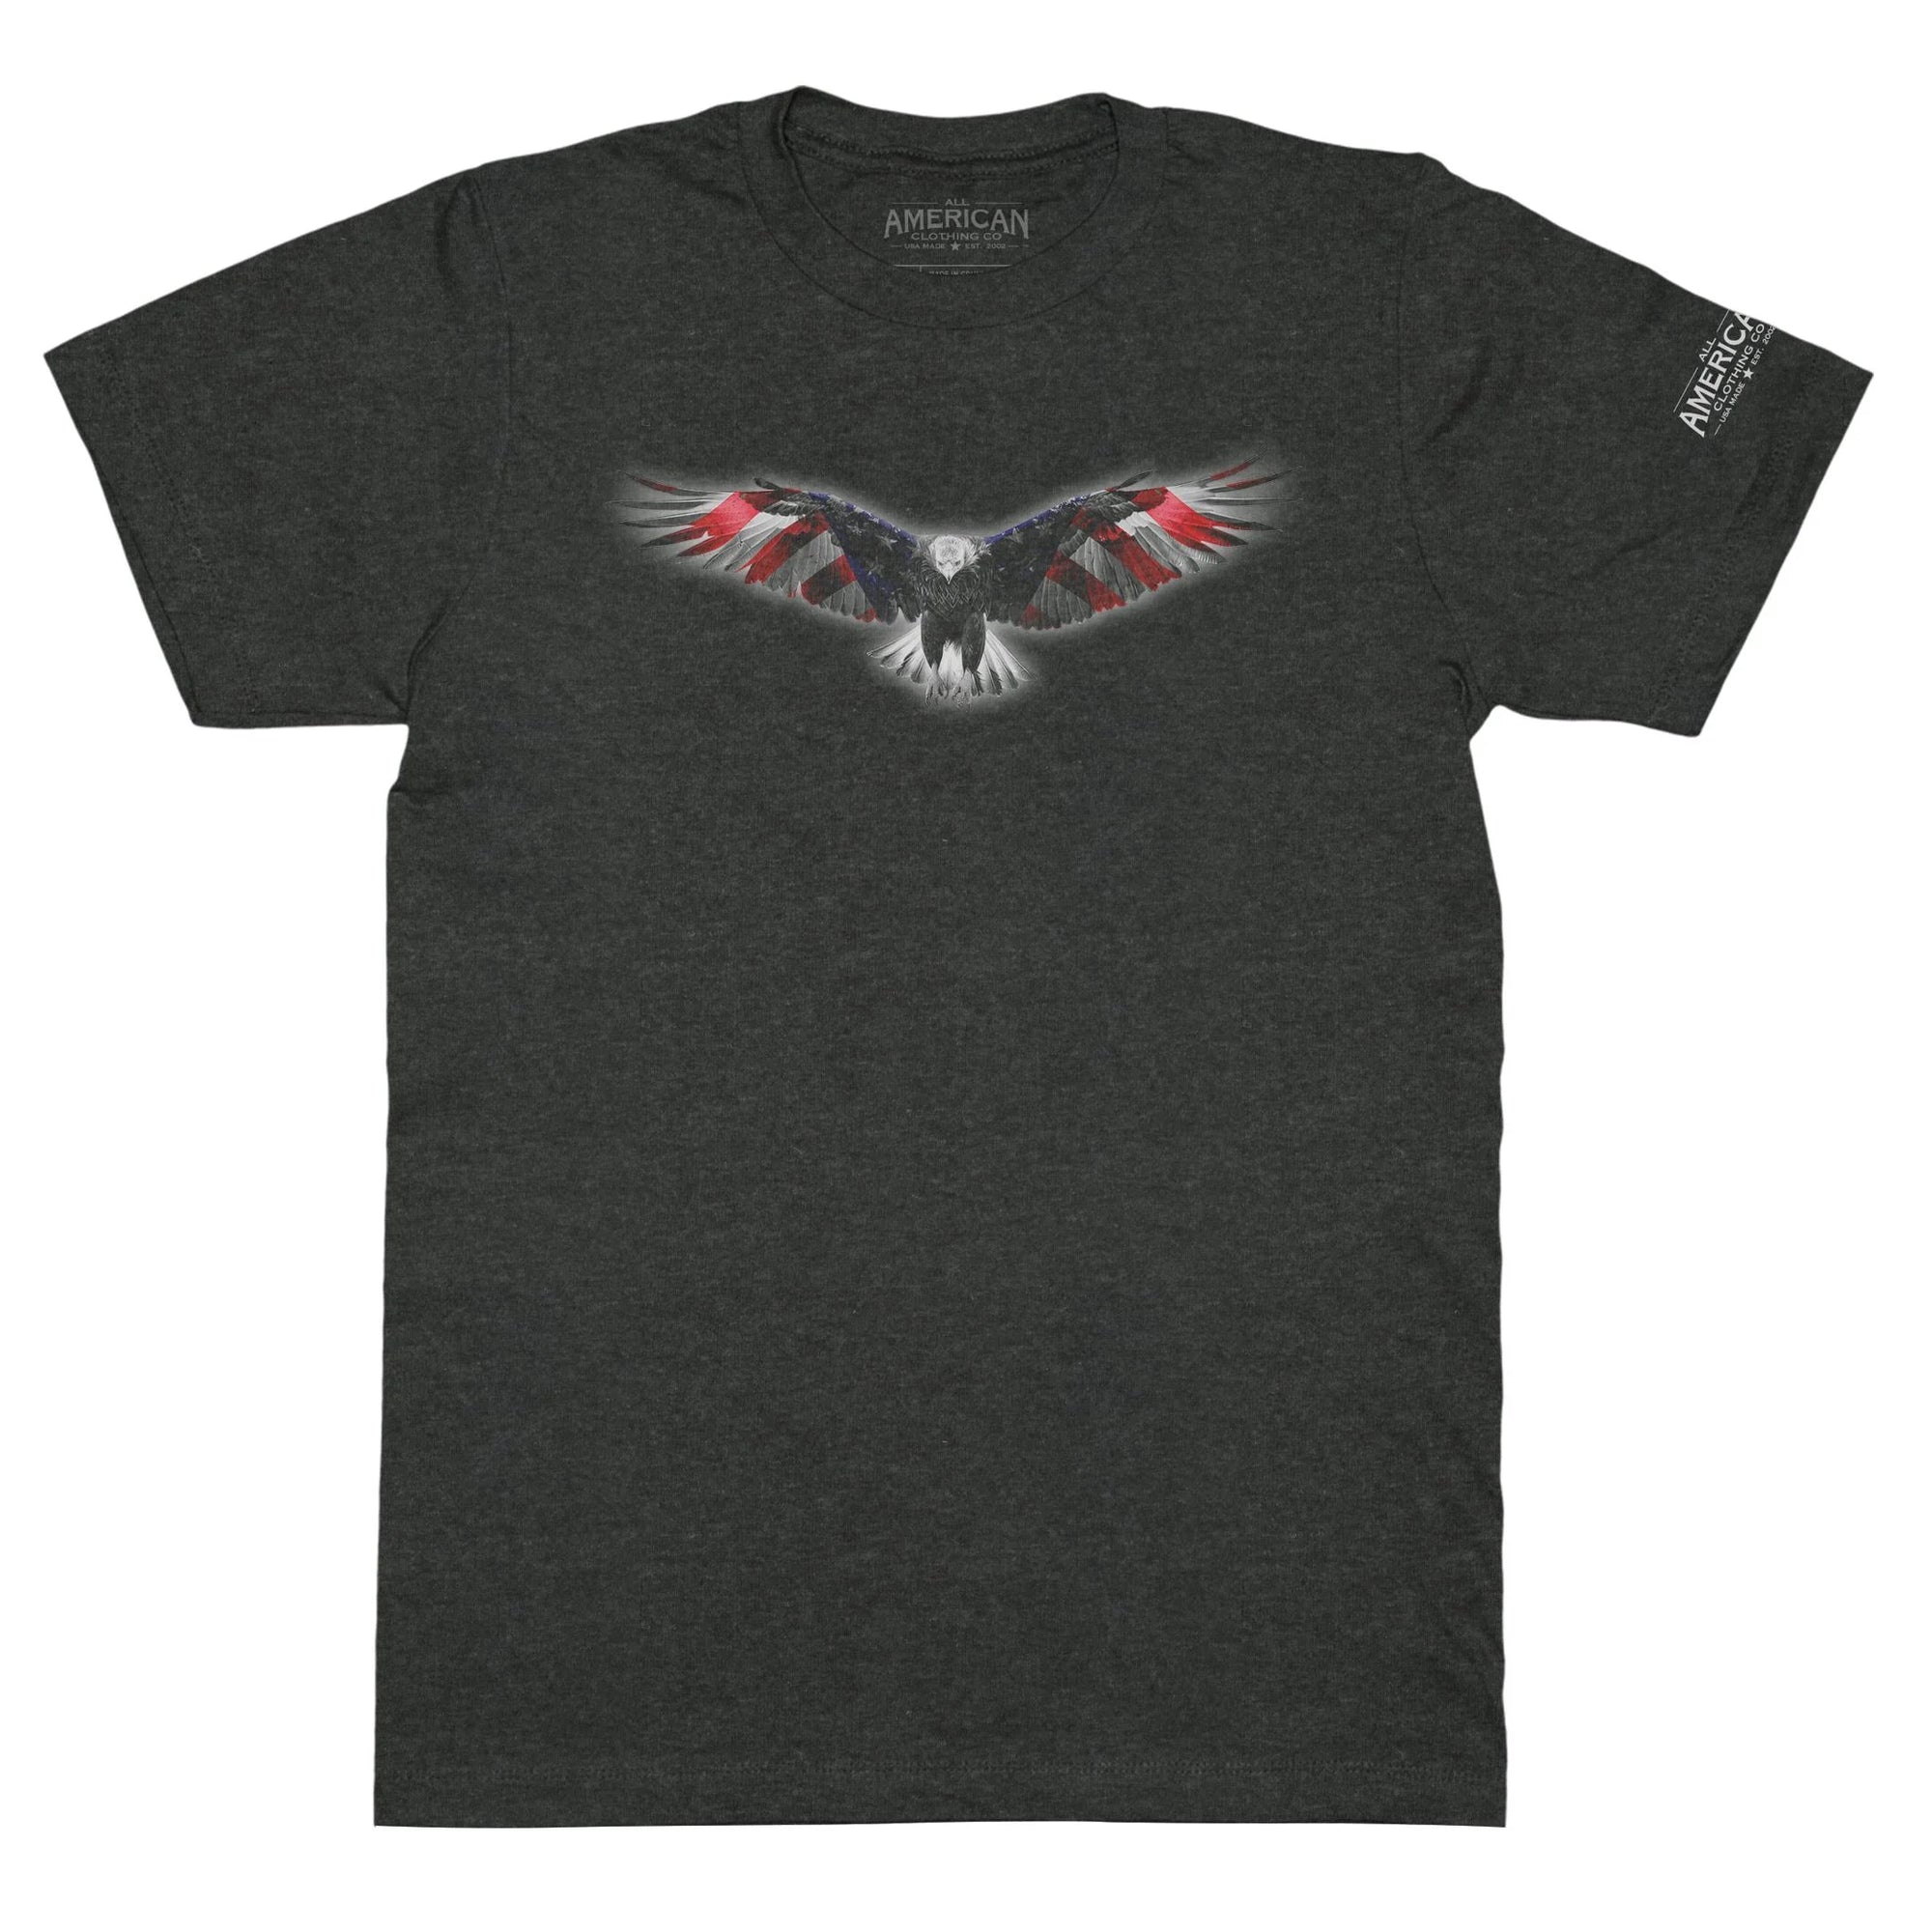 Patriotic Eagle Graphic T-Shirt All American Clothing Co.